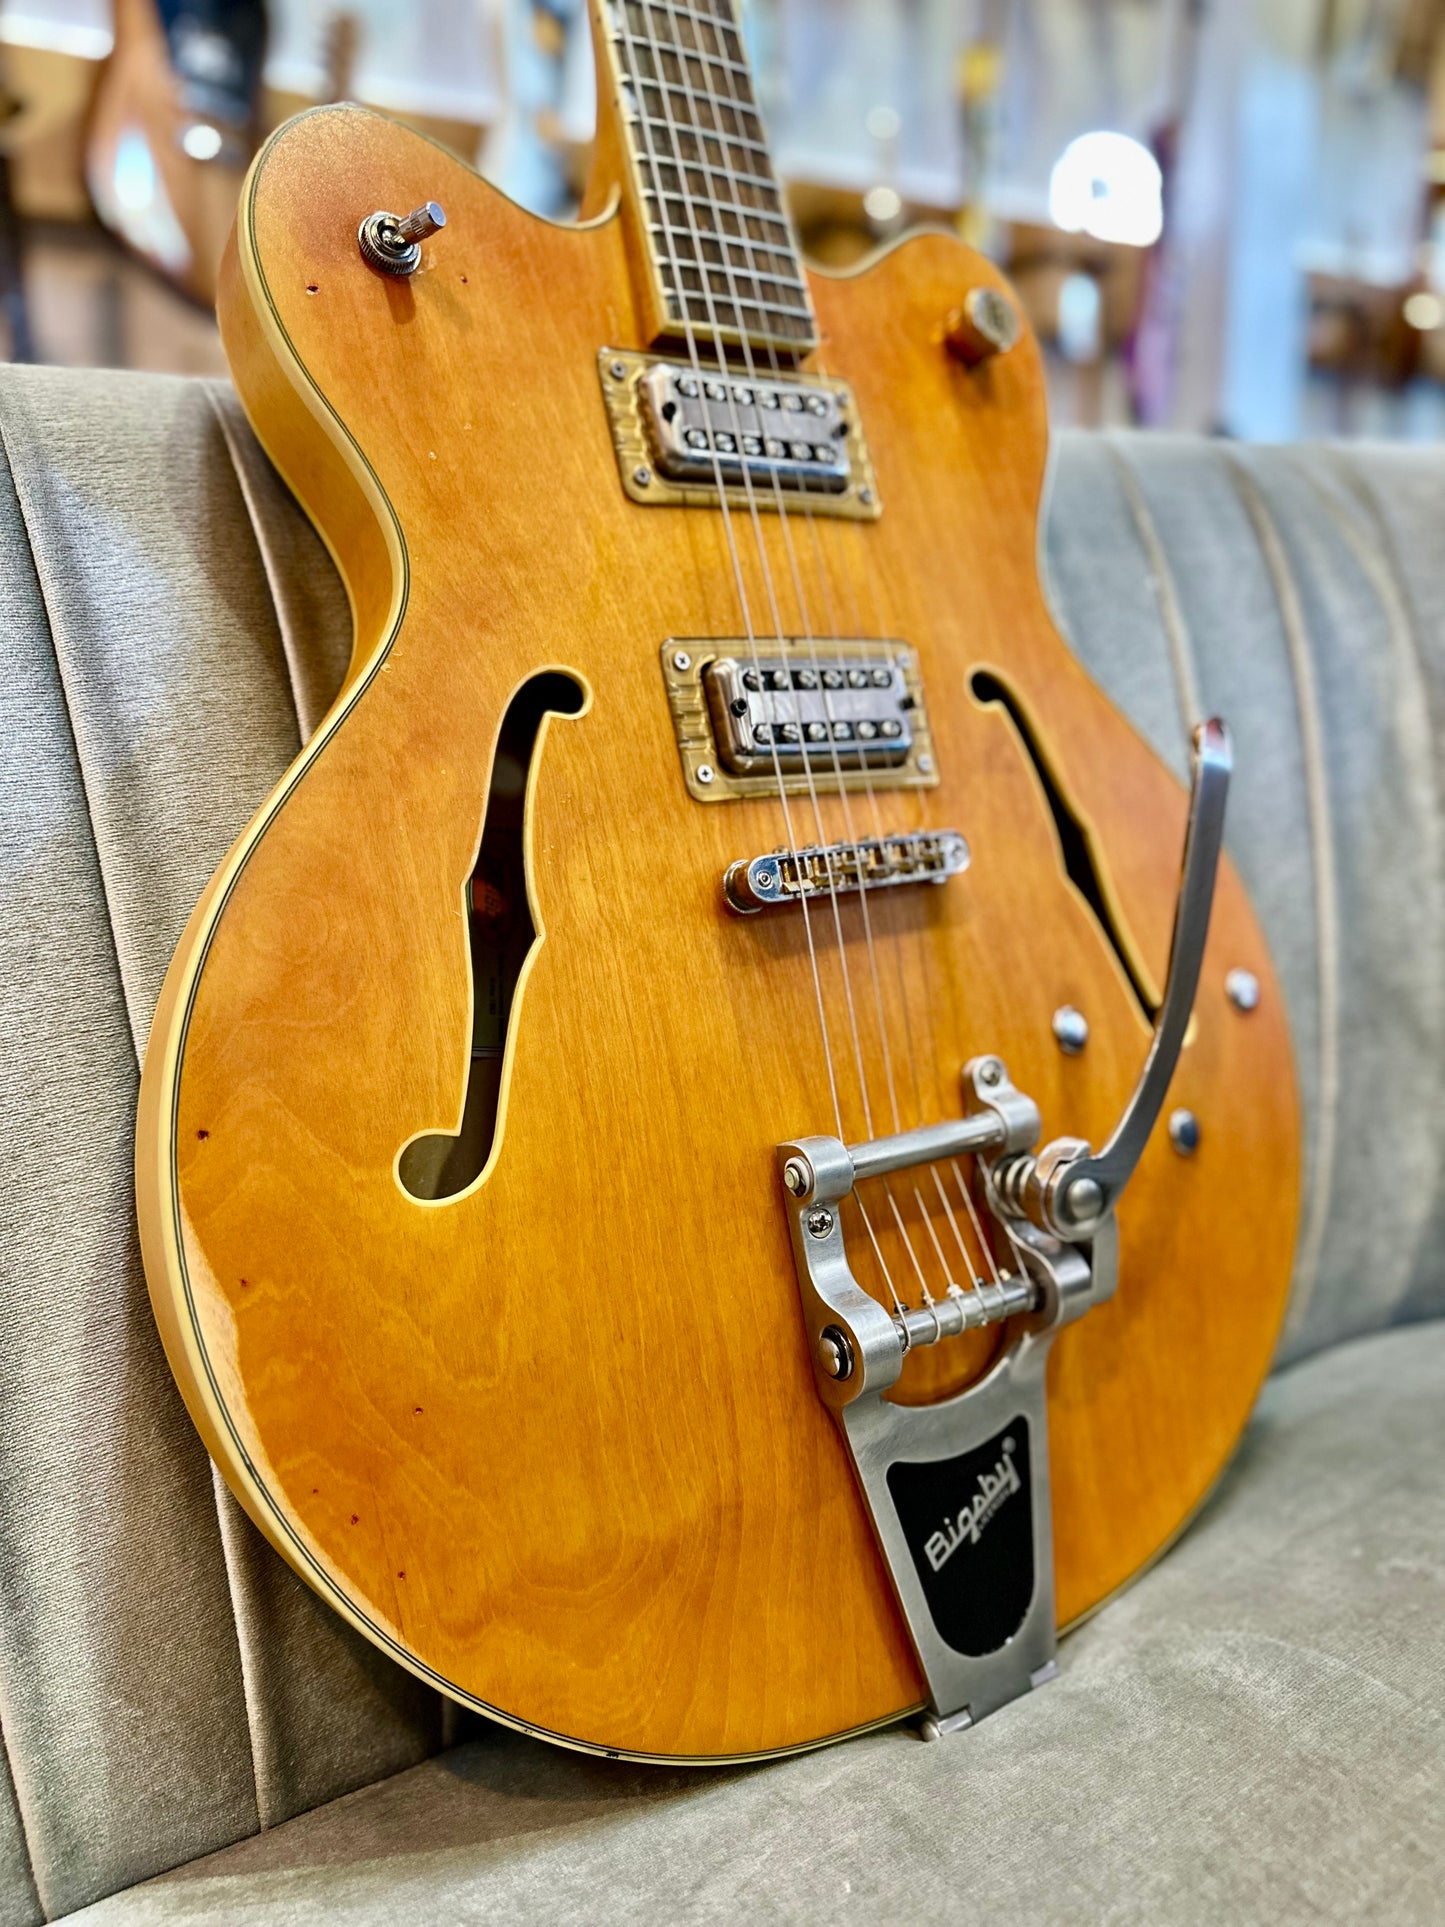 Gretsch | G5622T | Rabid Dog Relic | Relic Vintage Faded Orange | MadLove Filtertrons